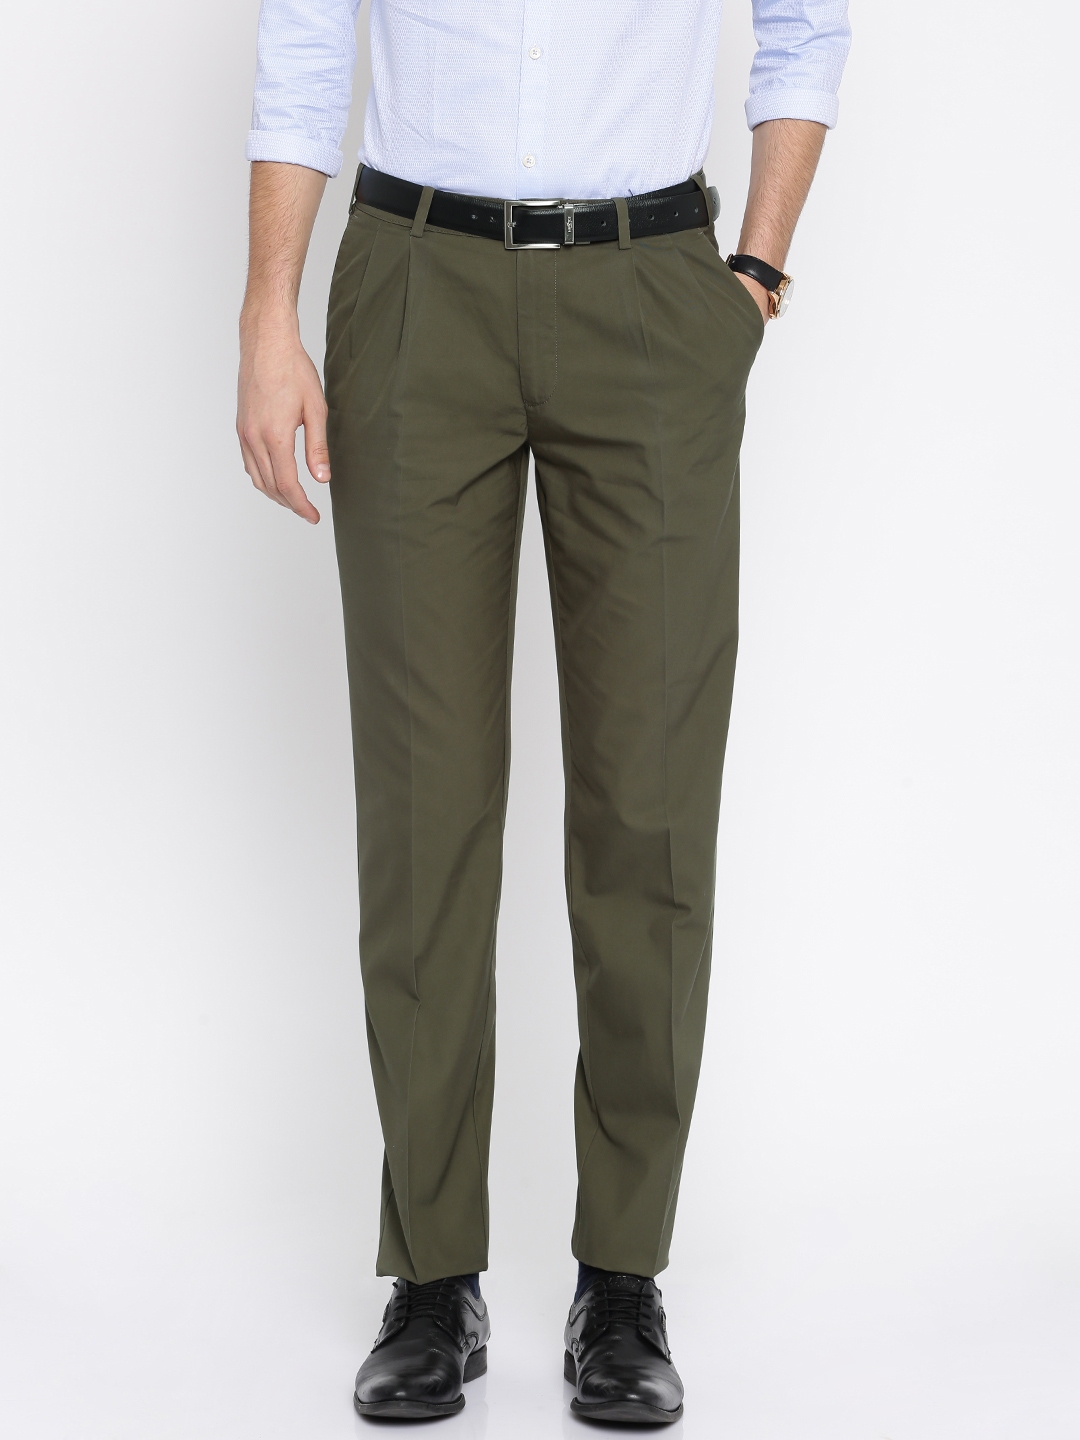 Chic Outfit Ideas for Green Shirt Matching Pant